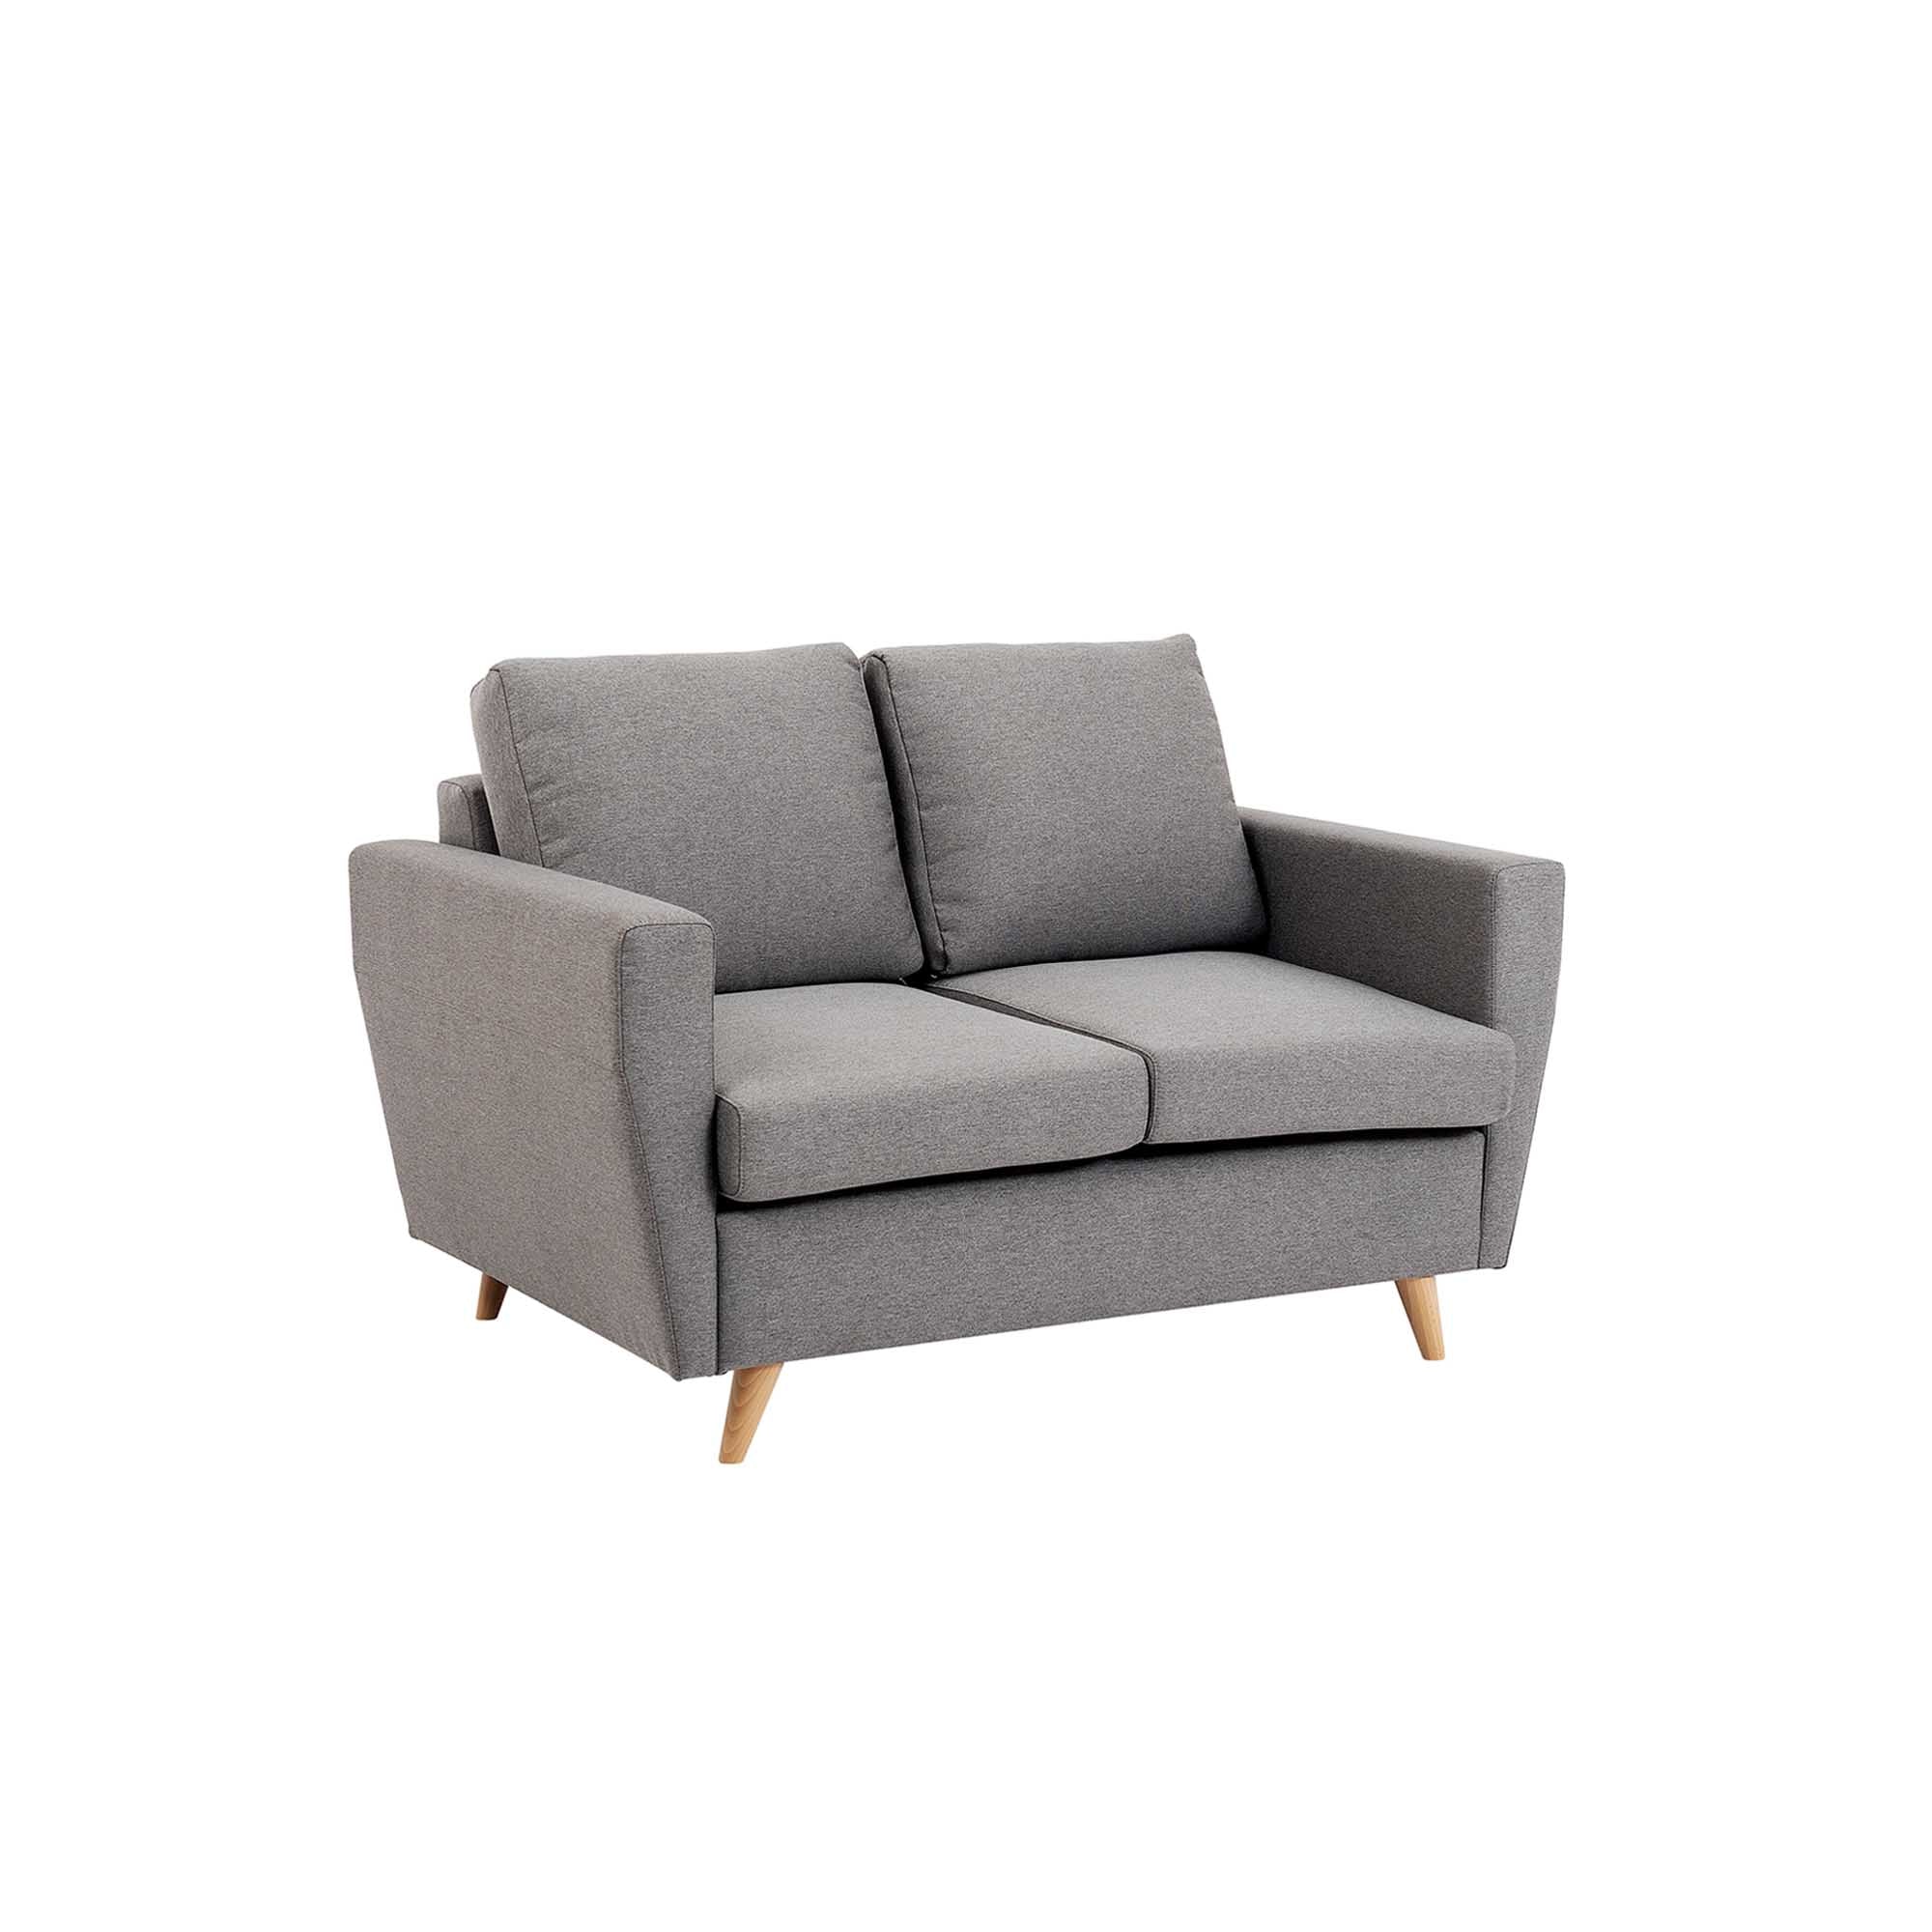 LOVER Sofa 2 Seater-upholstery colour grey platinum white background